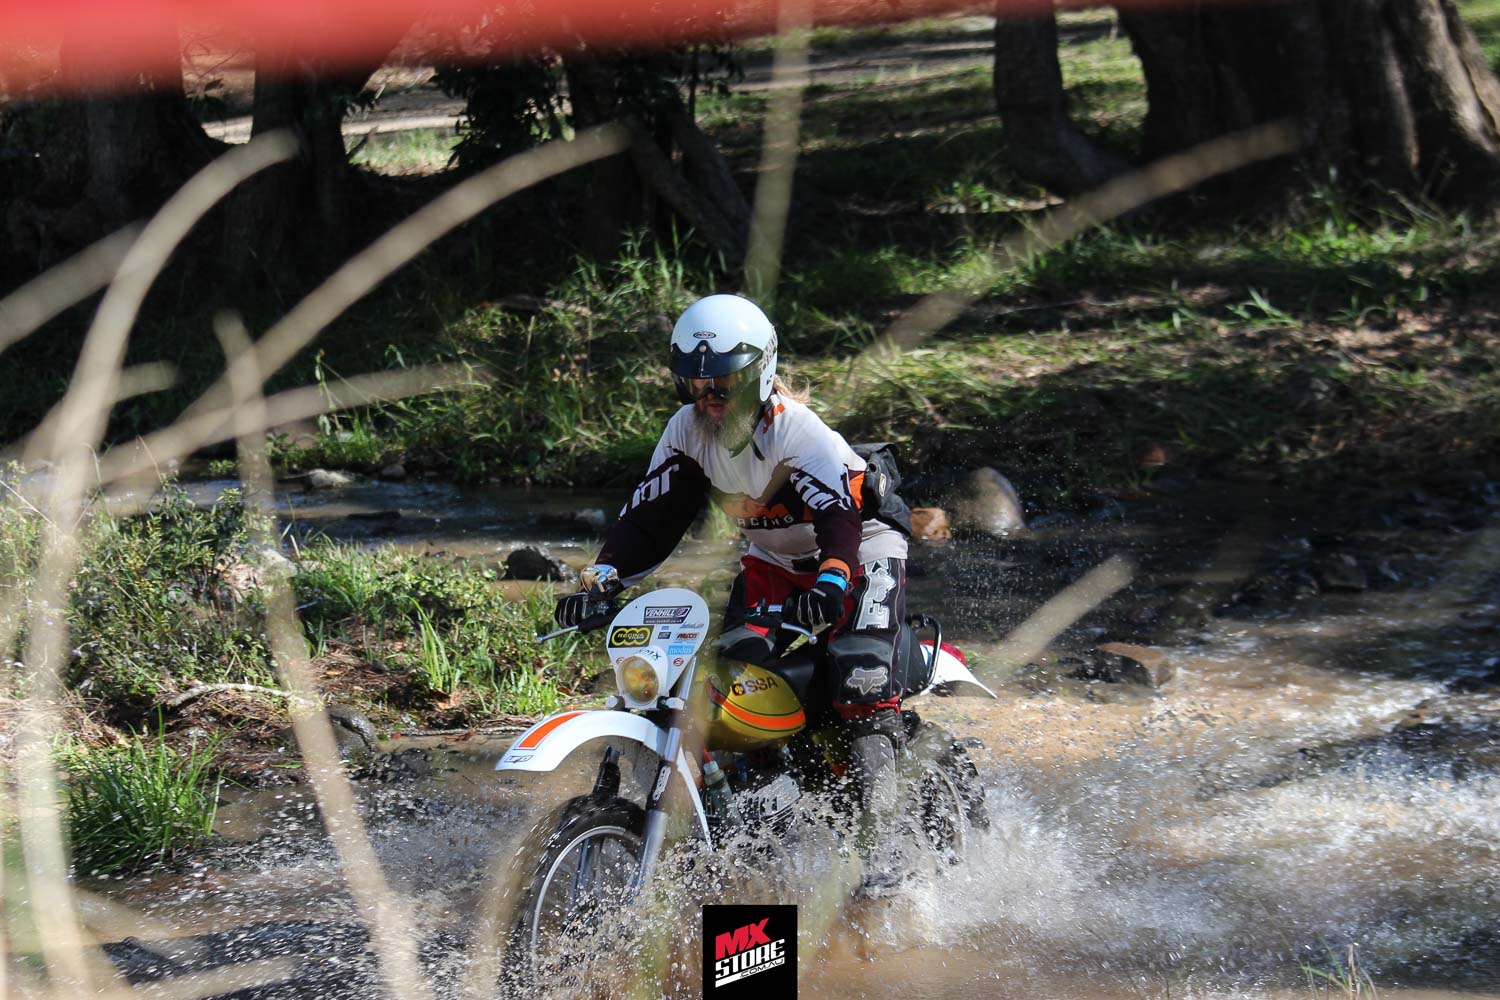 Ossa crossing one of the enduro trail creeks